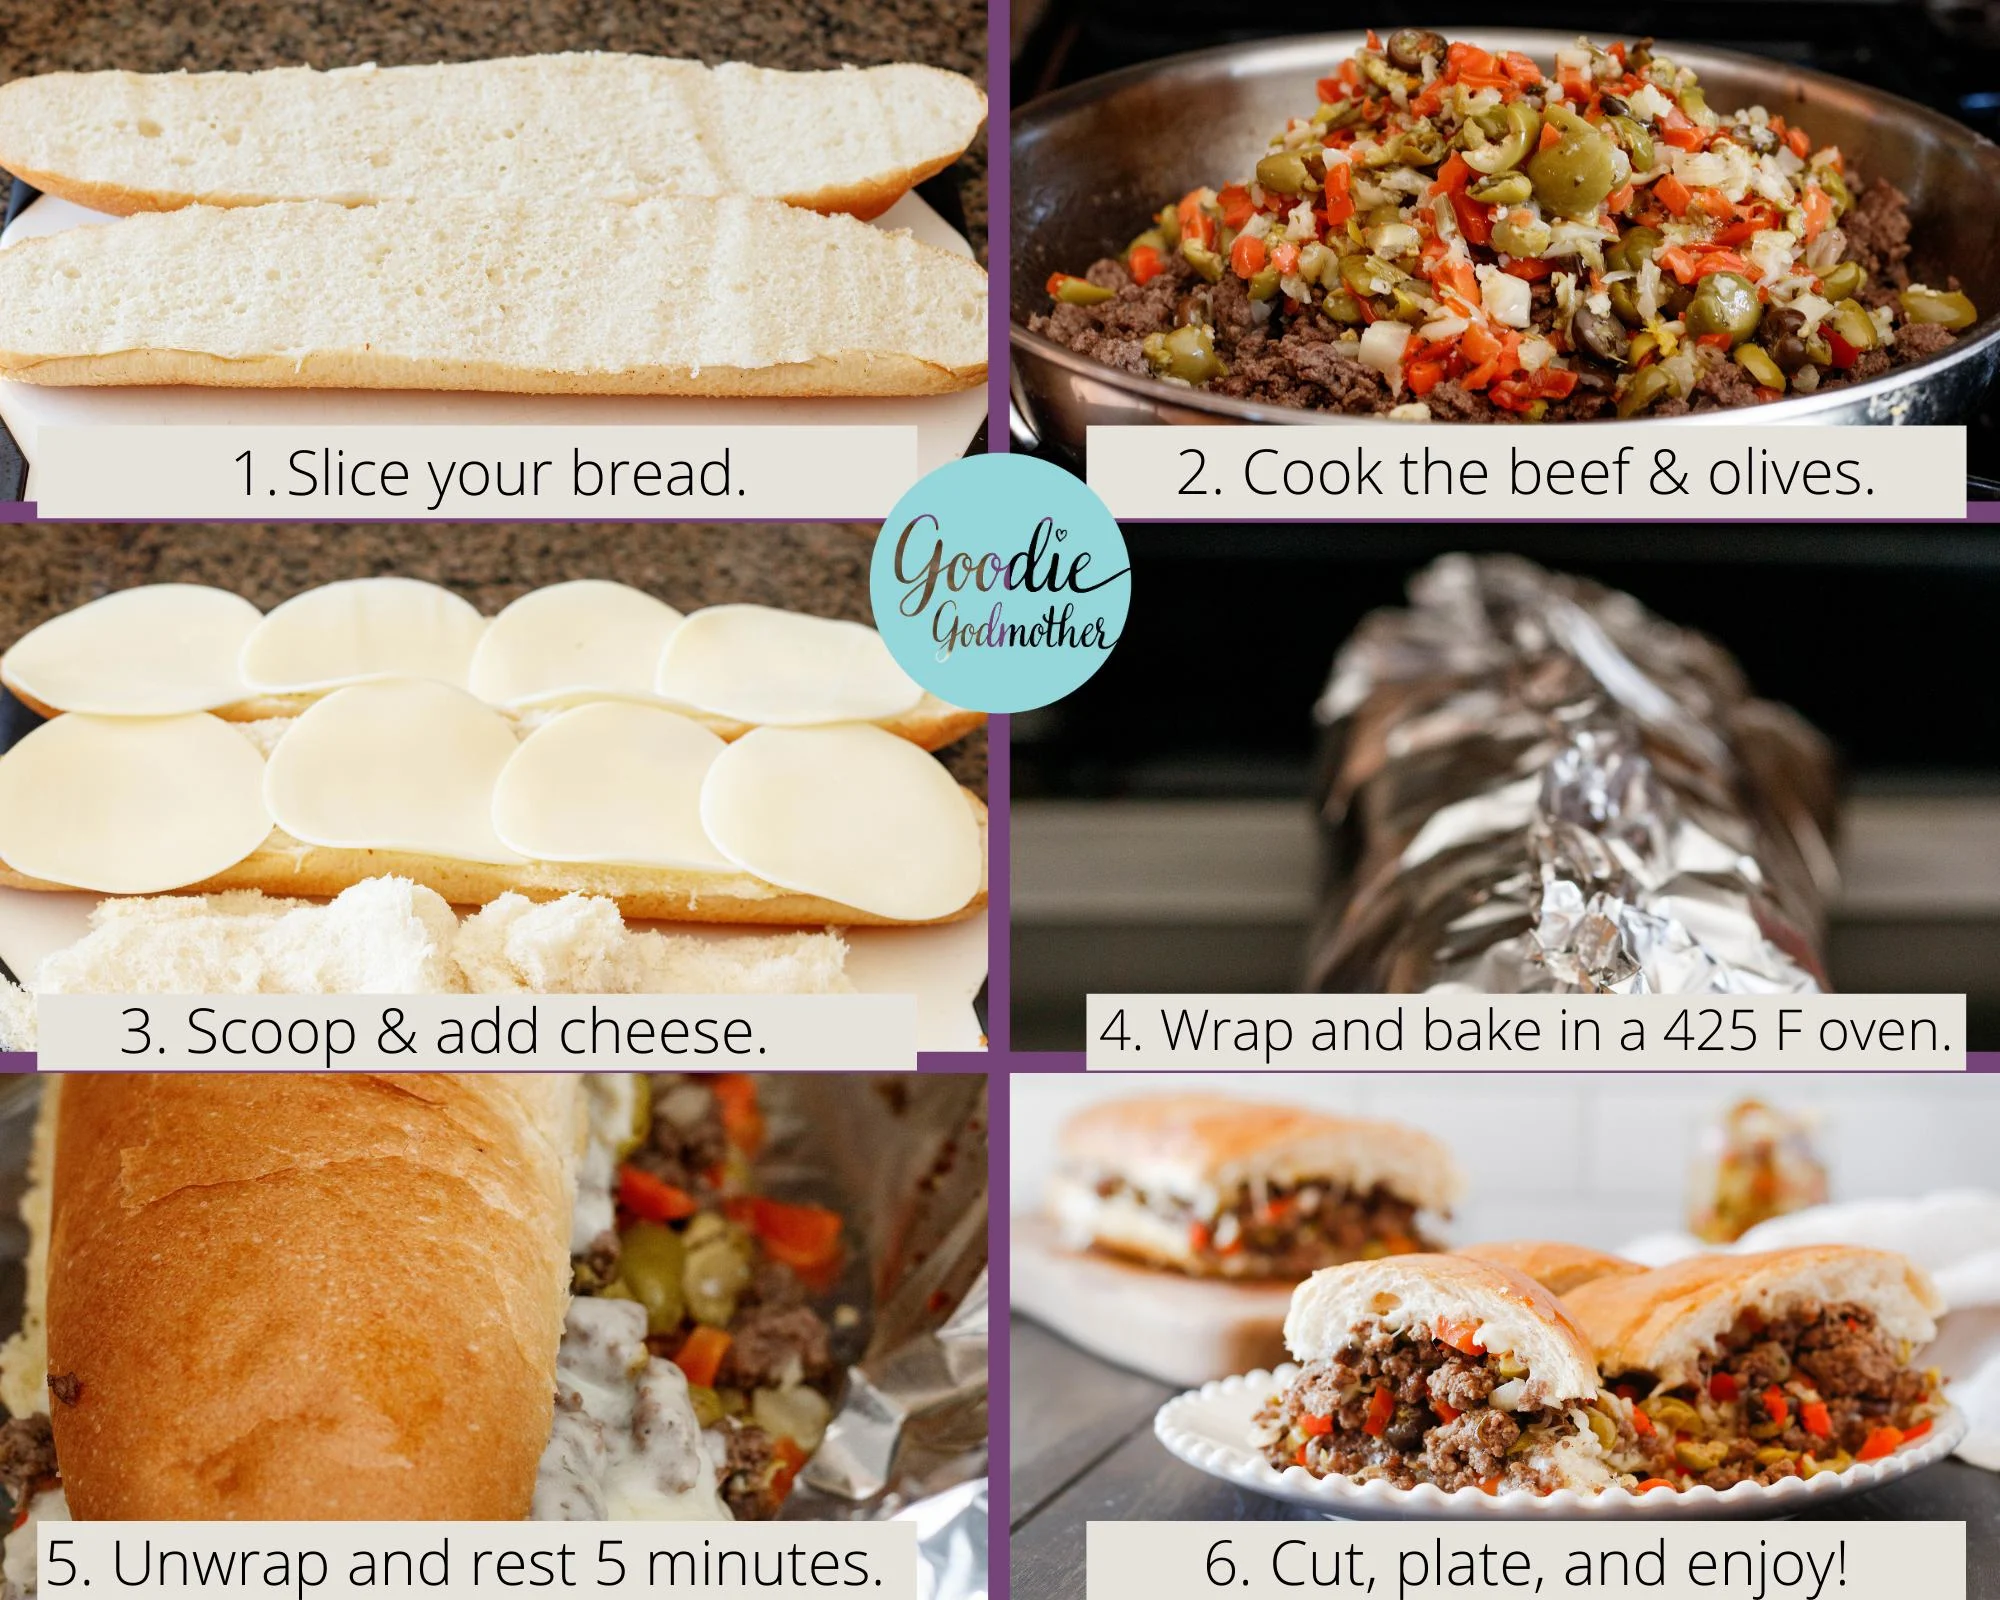 ground beef po' boy (aka the godfather sandwich) assembly infographic. Shows the 6 basic steps to building this delicious hot sub. 1. Slice the bread. 2. Cook your filling. 3. Scoop the loaf and add your cheese. 4. Wrap the filled sandwich in foil. 5. Bake until the cheese has melted. 6. Slice and enjoy!